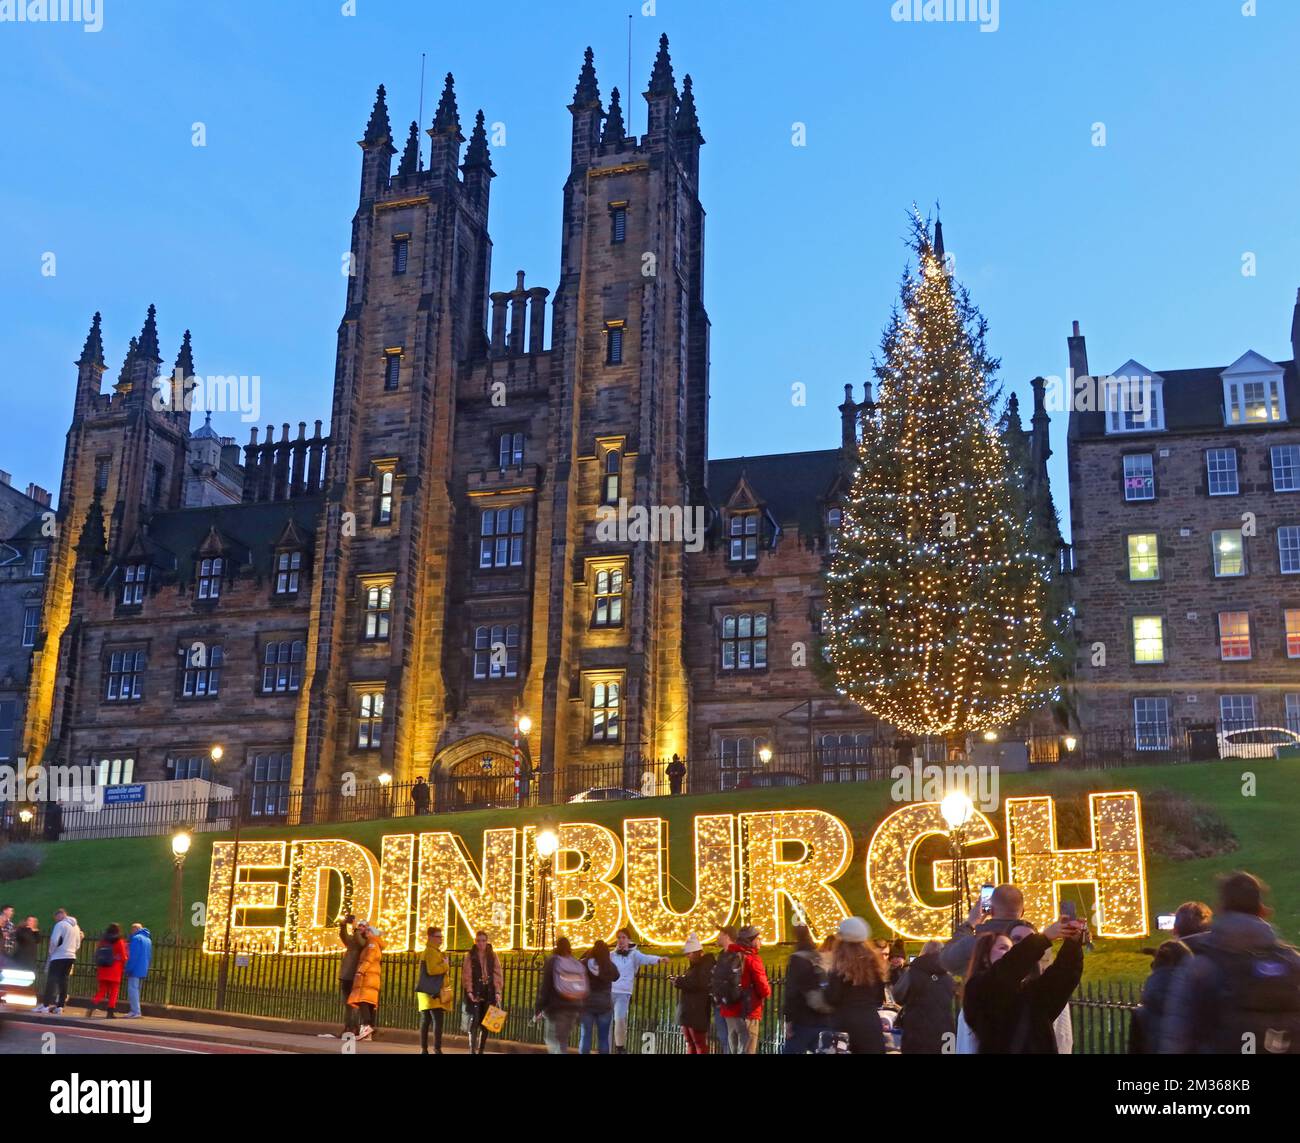 The Mound at Christmas and Hogmanay, Old Town, Edinburgh in Lights, capitale de l'Écosse, Royaume-Uni - Epelé en lettres Banque D'Images